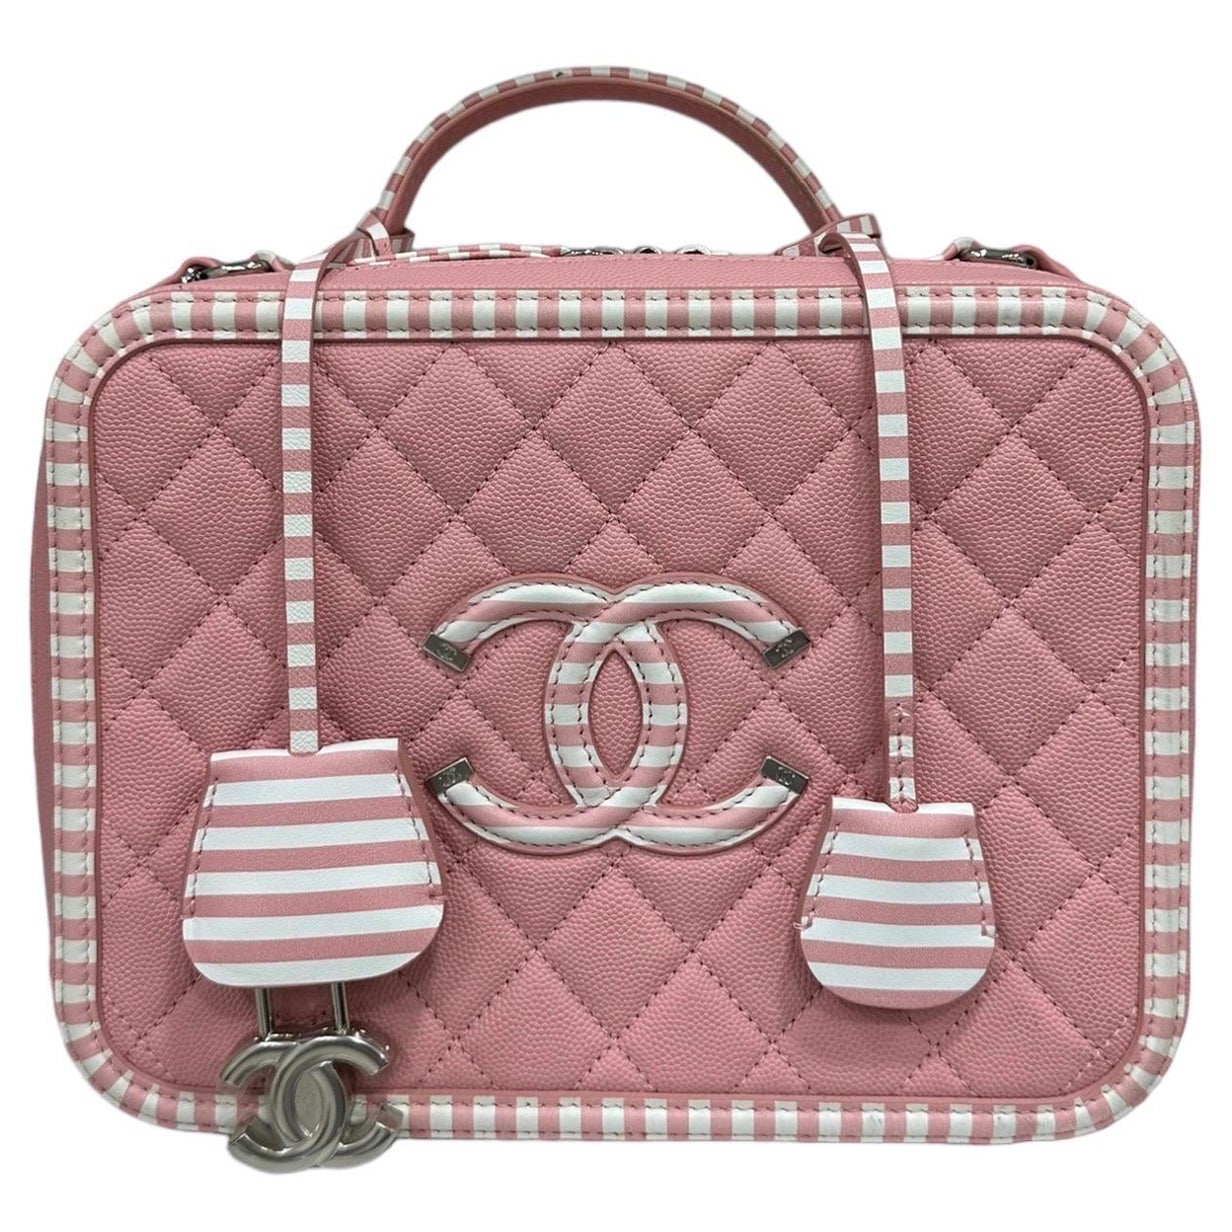 Chanel Beauty Case - 3 For Sale on 1stDibs